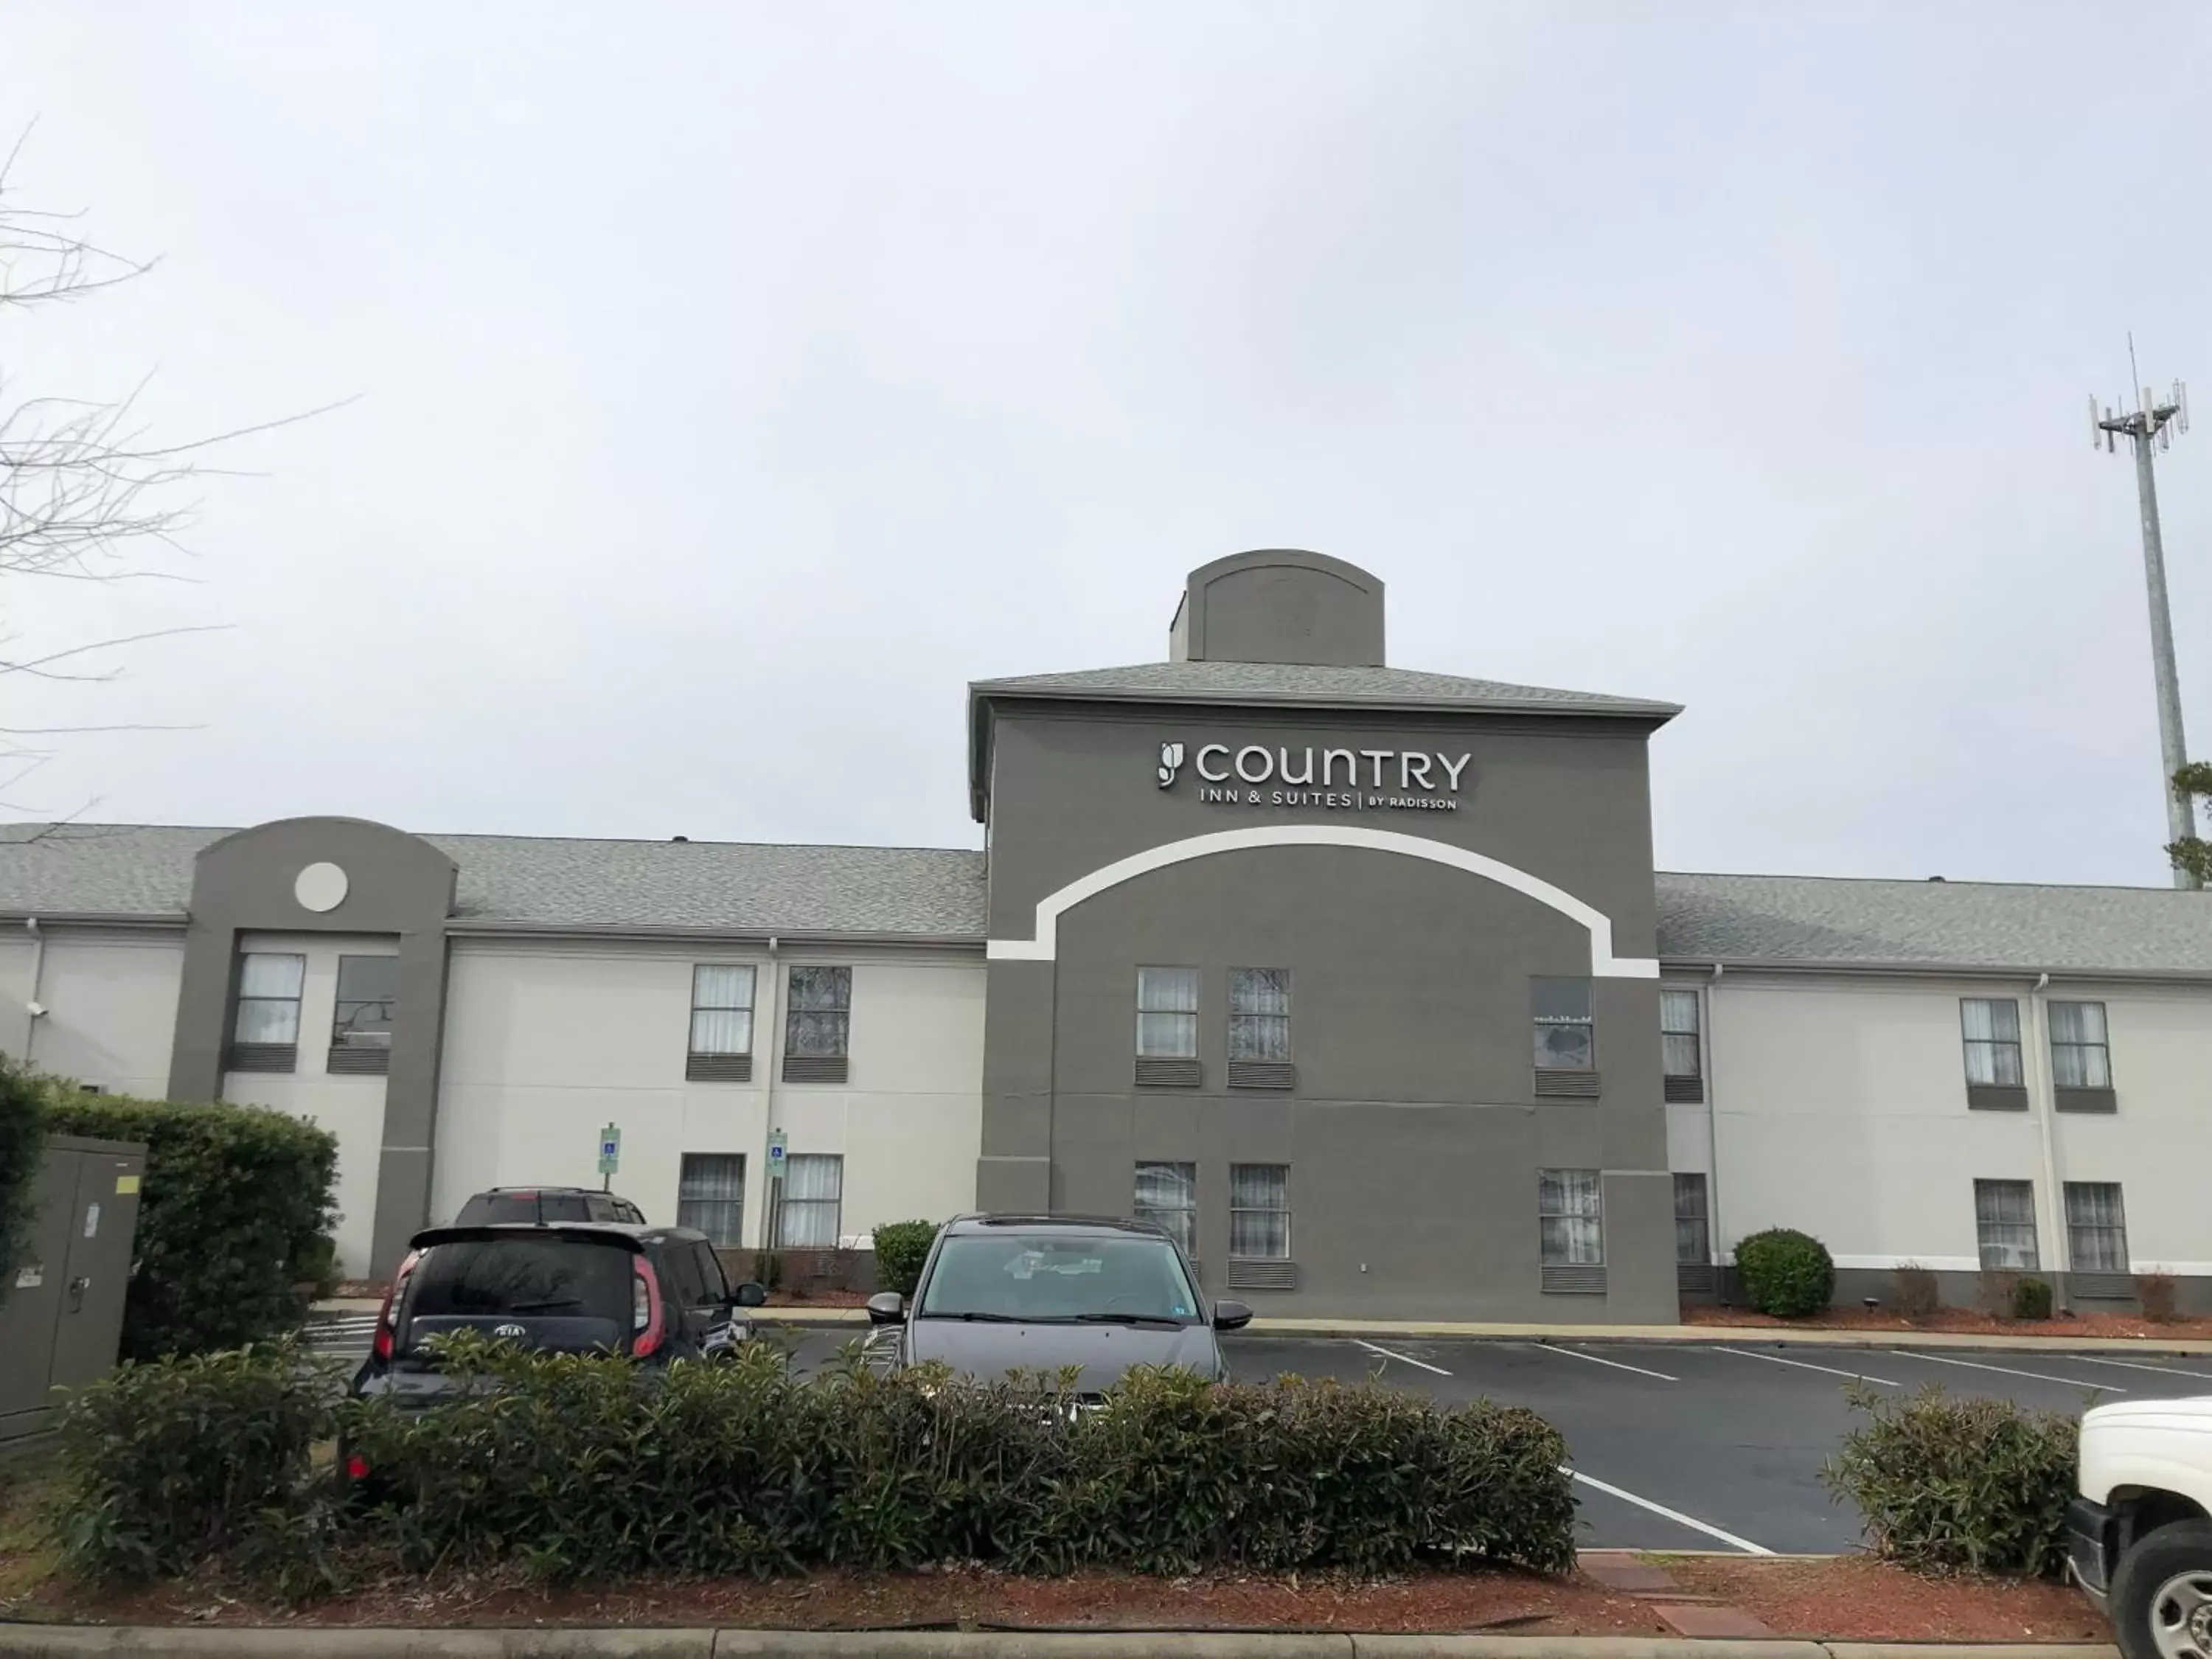 Property Building in Country Inn & Suites by Radisson, Greenville, NC